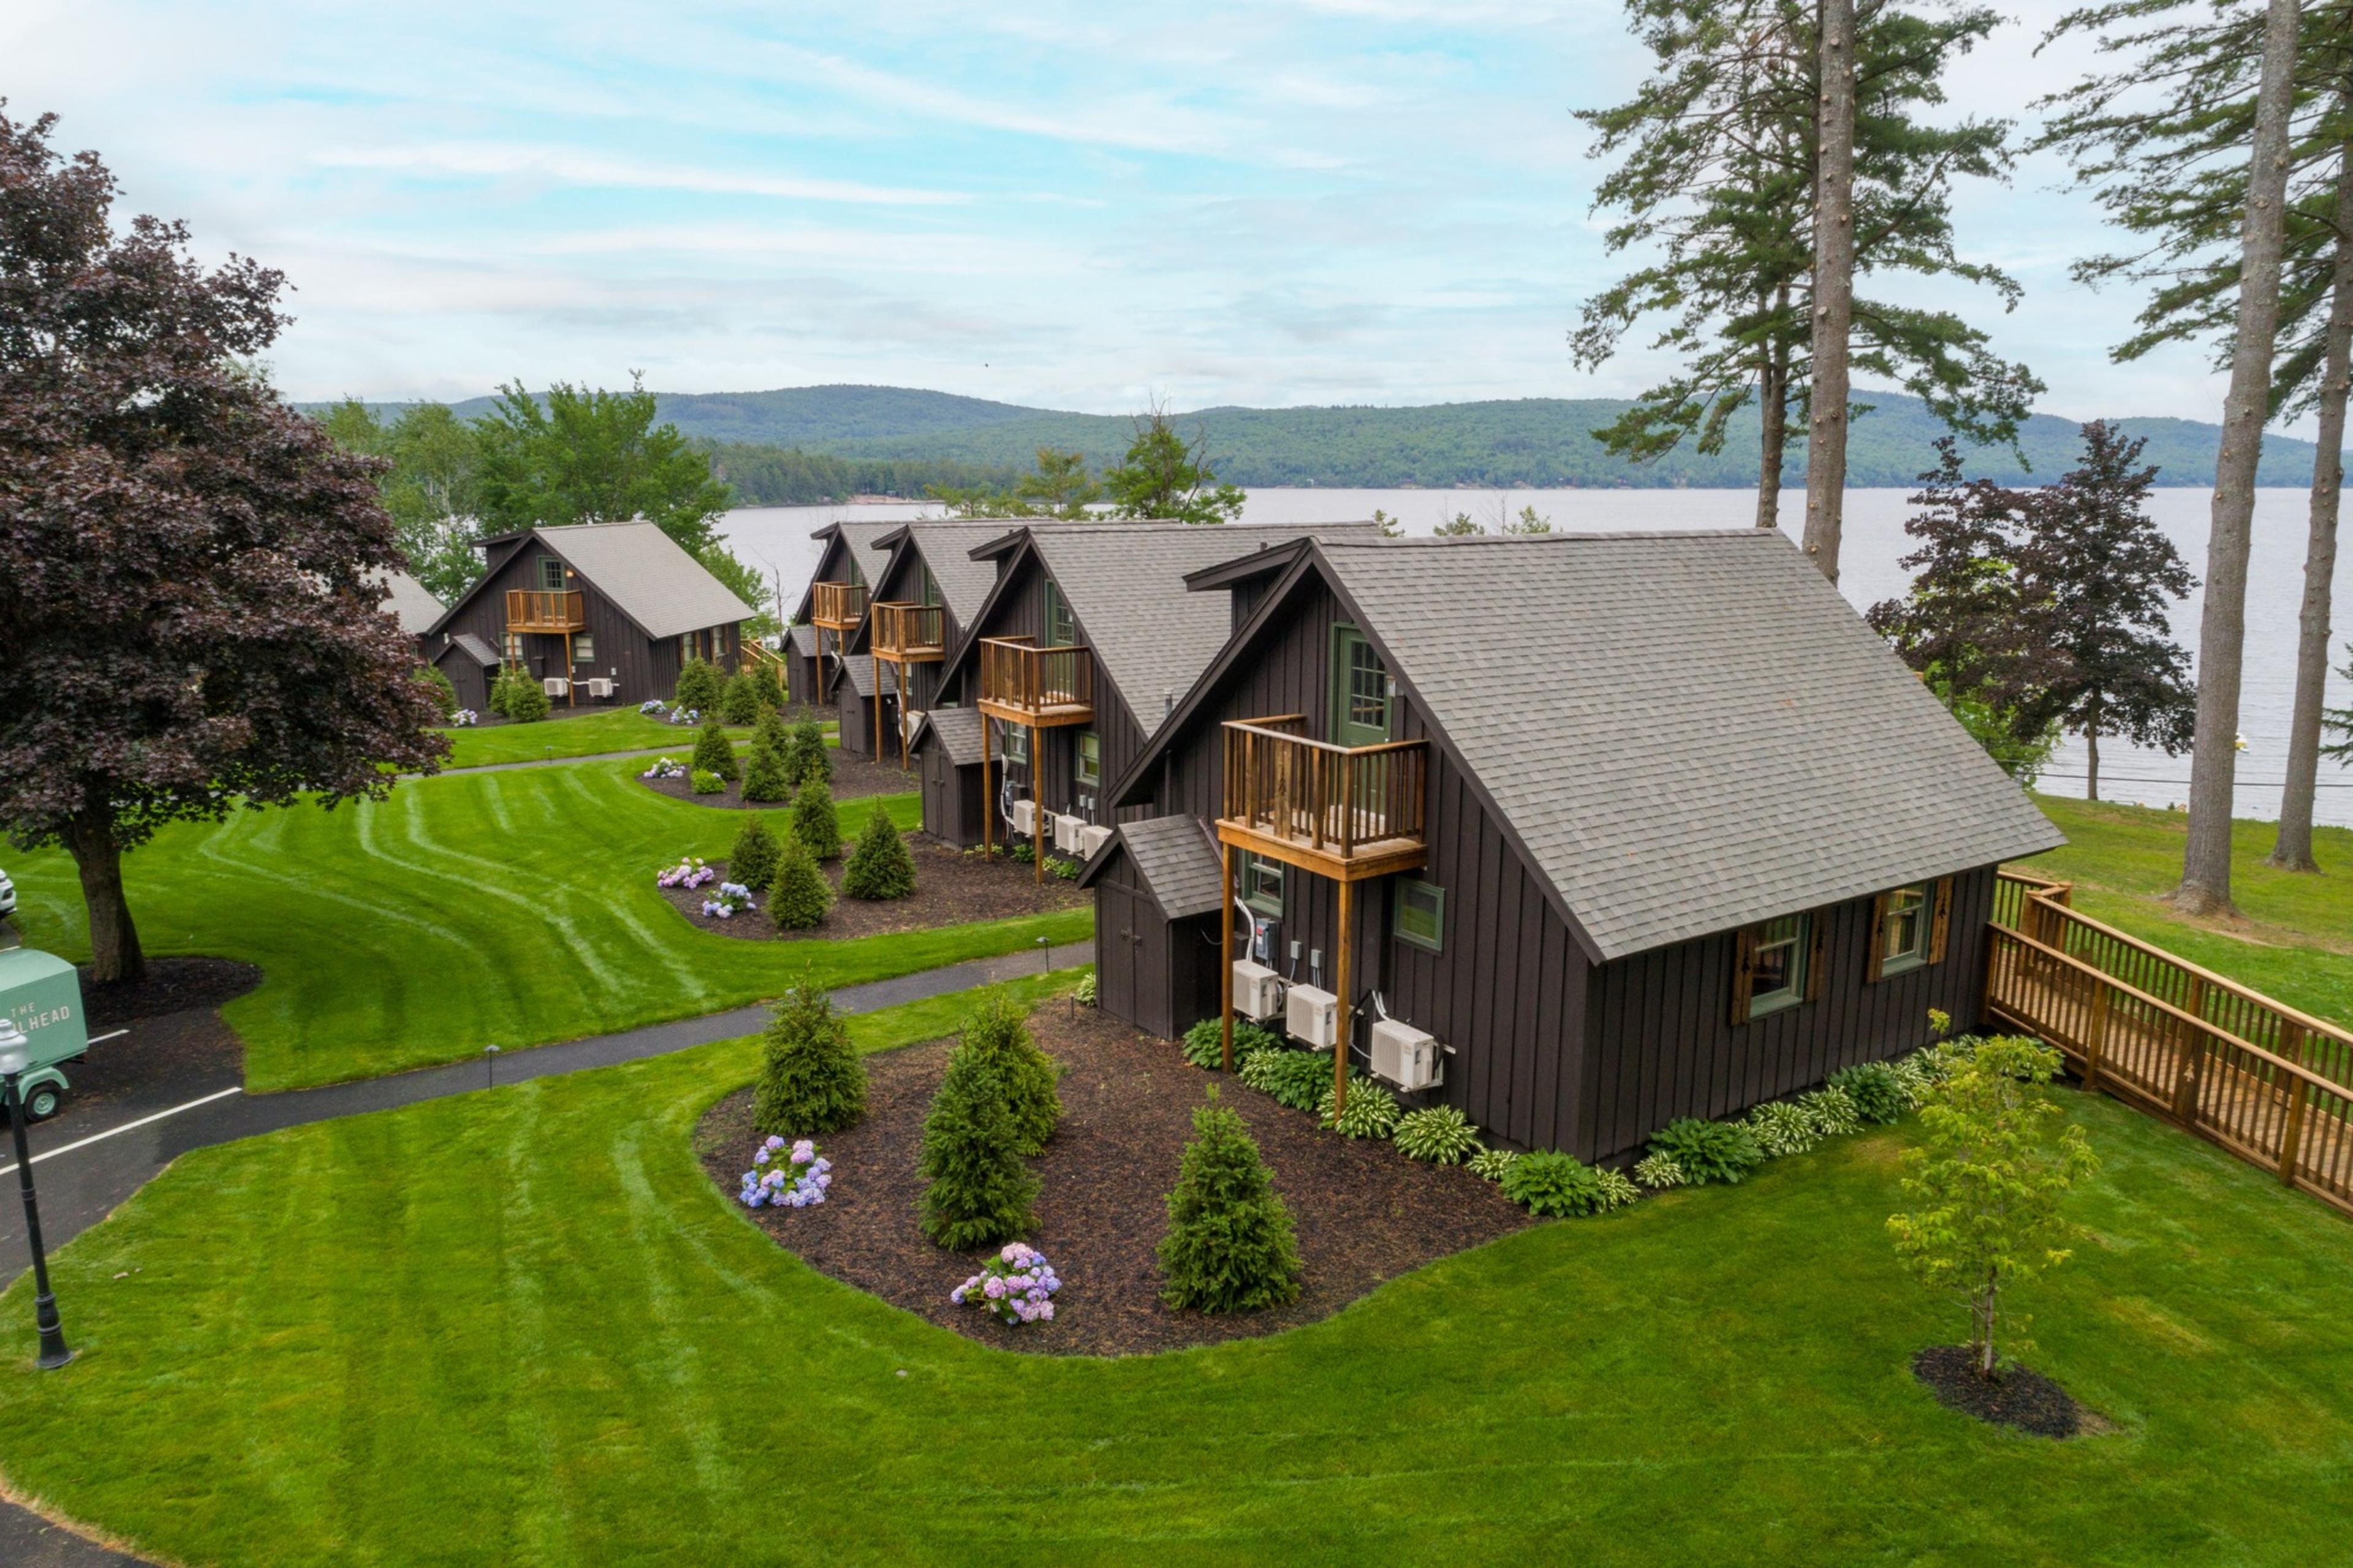 The Lodge at Schroon Lake